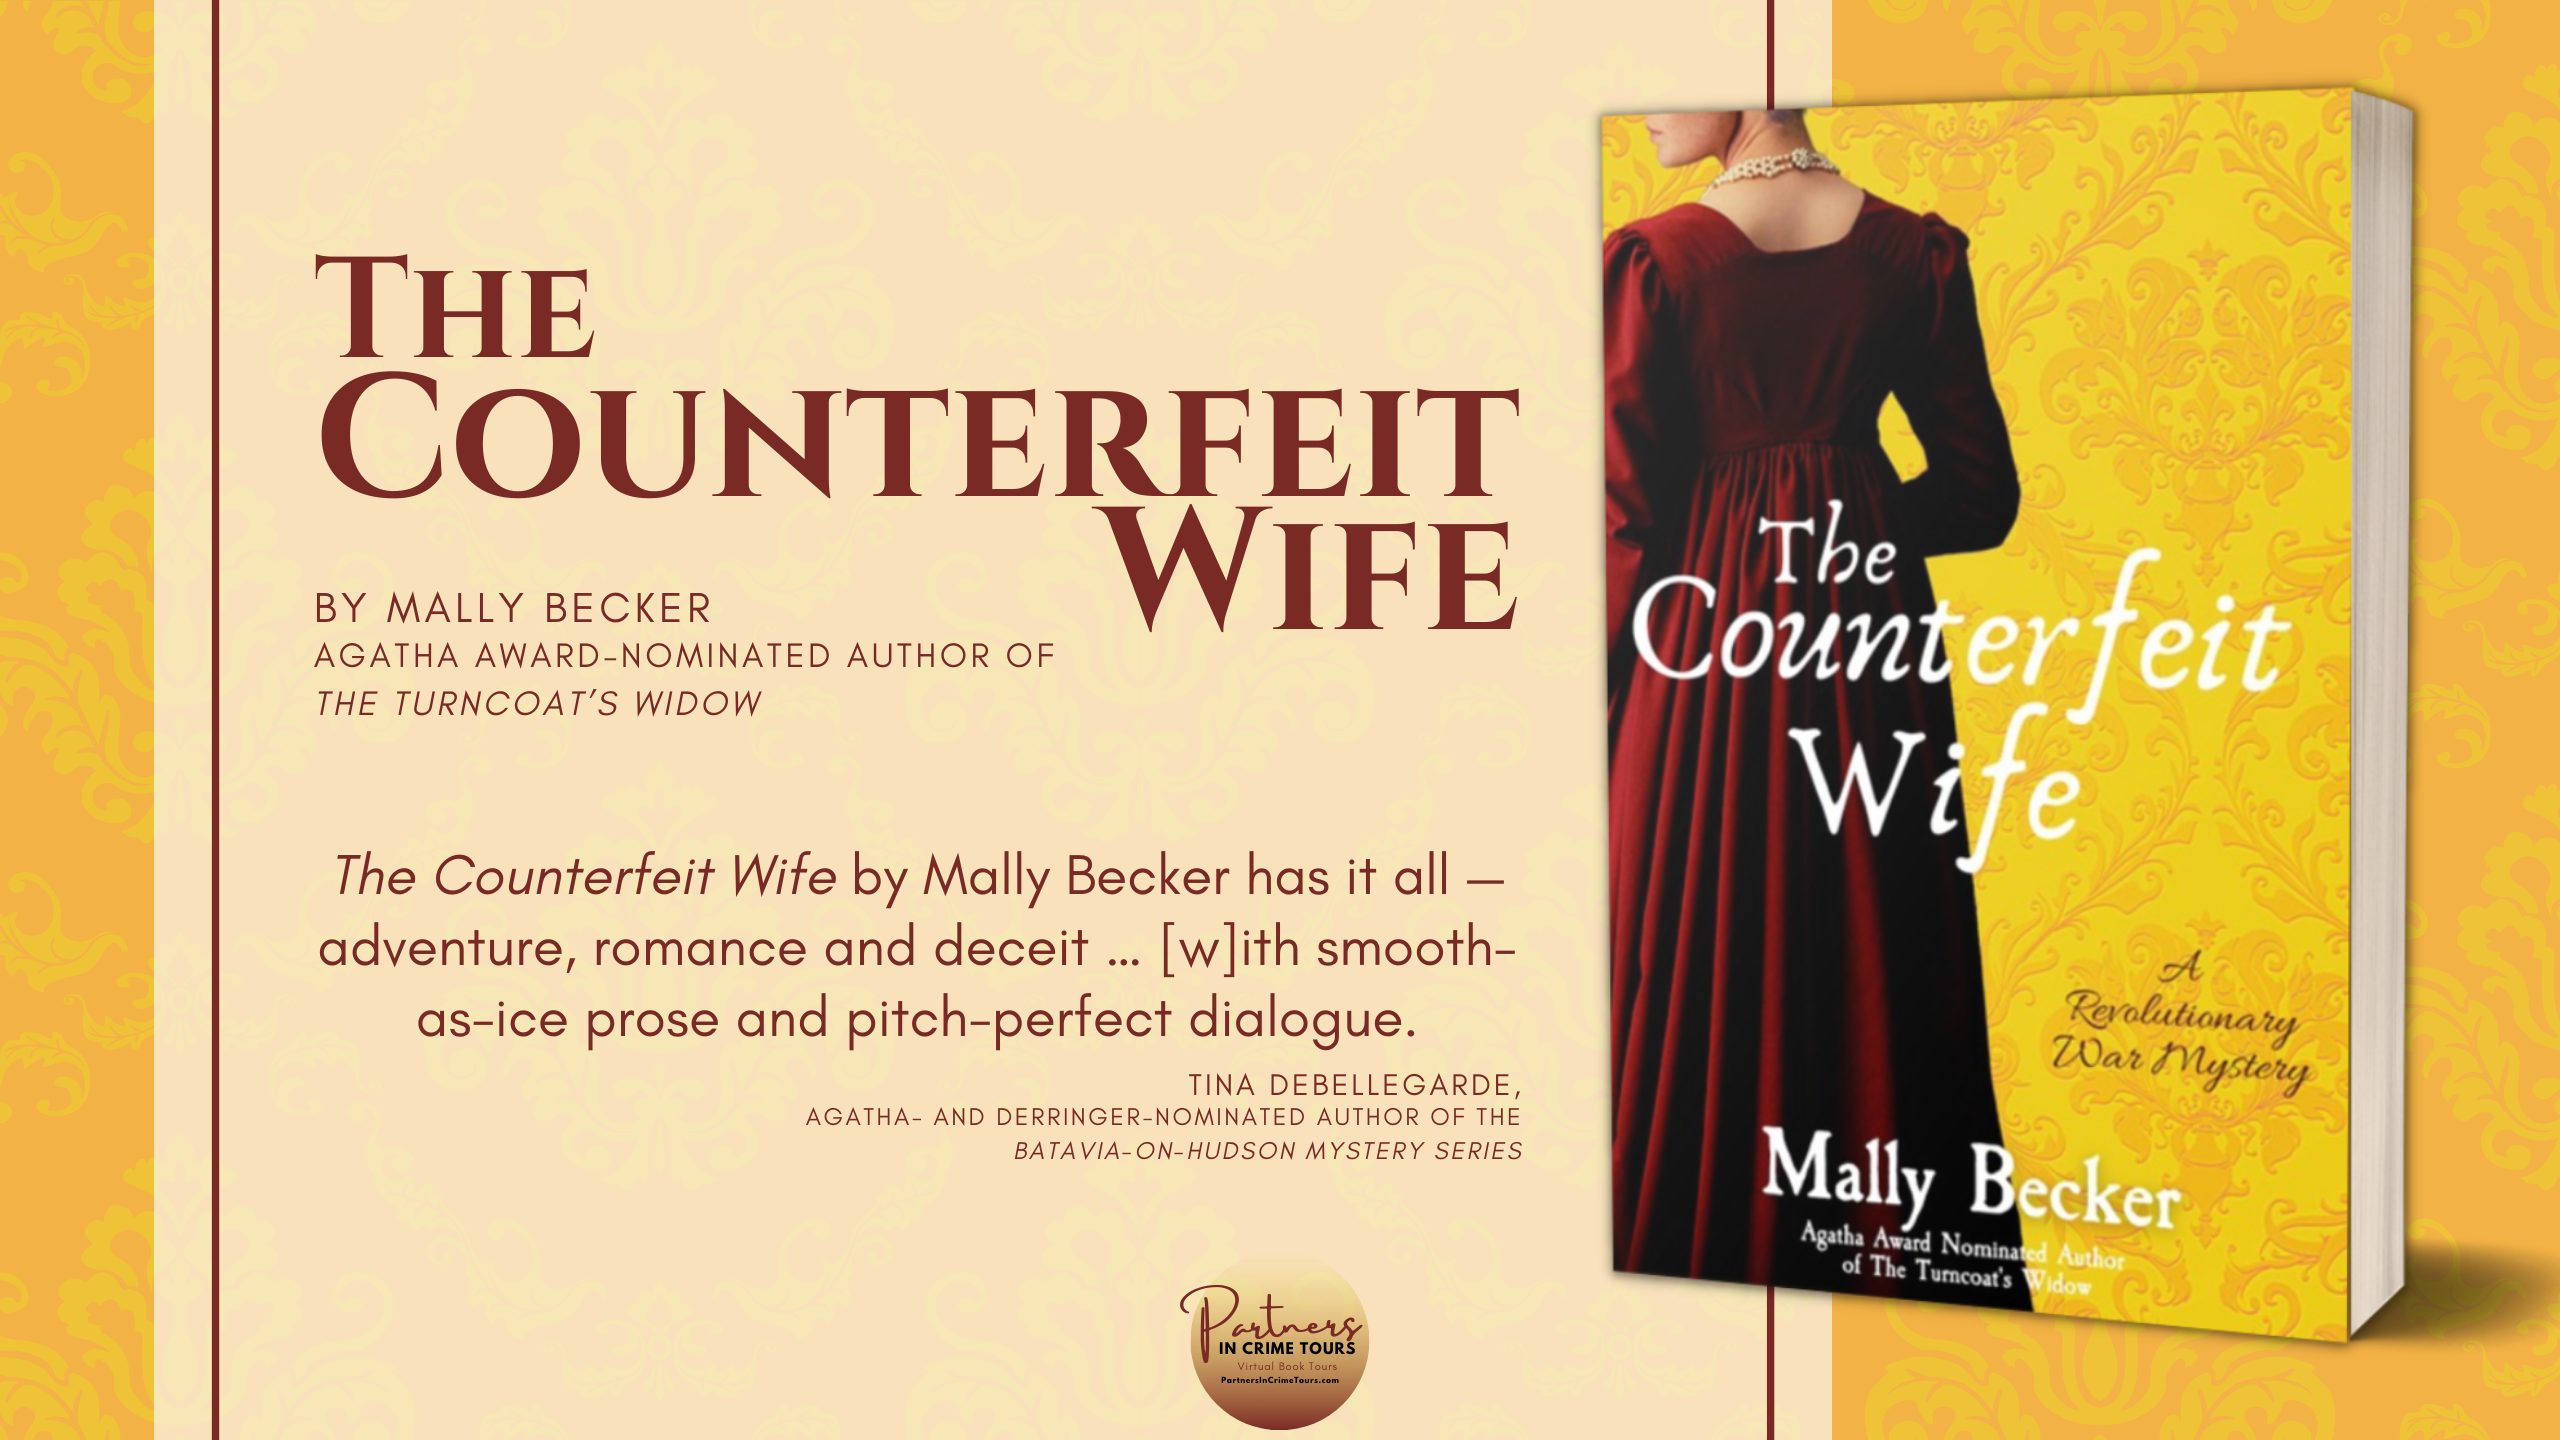 The Counterfeit Wife by Mally Becker – Showcase & Giveaway